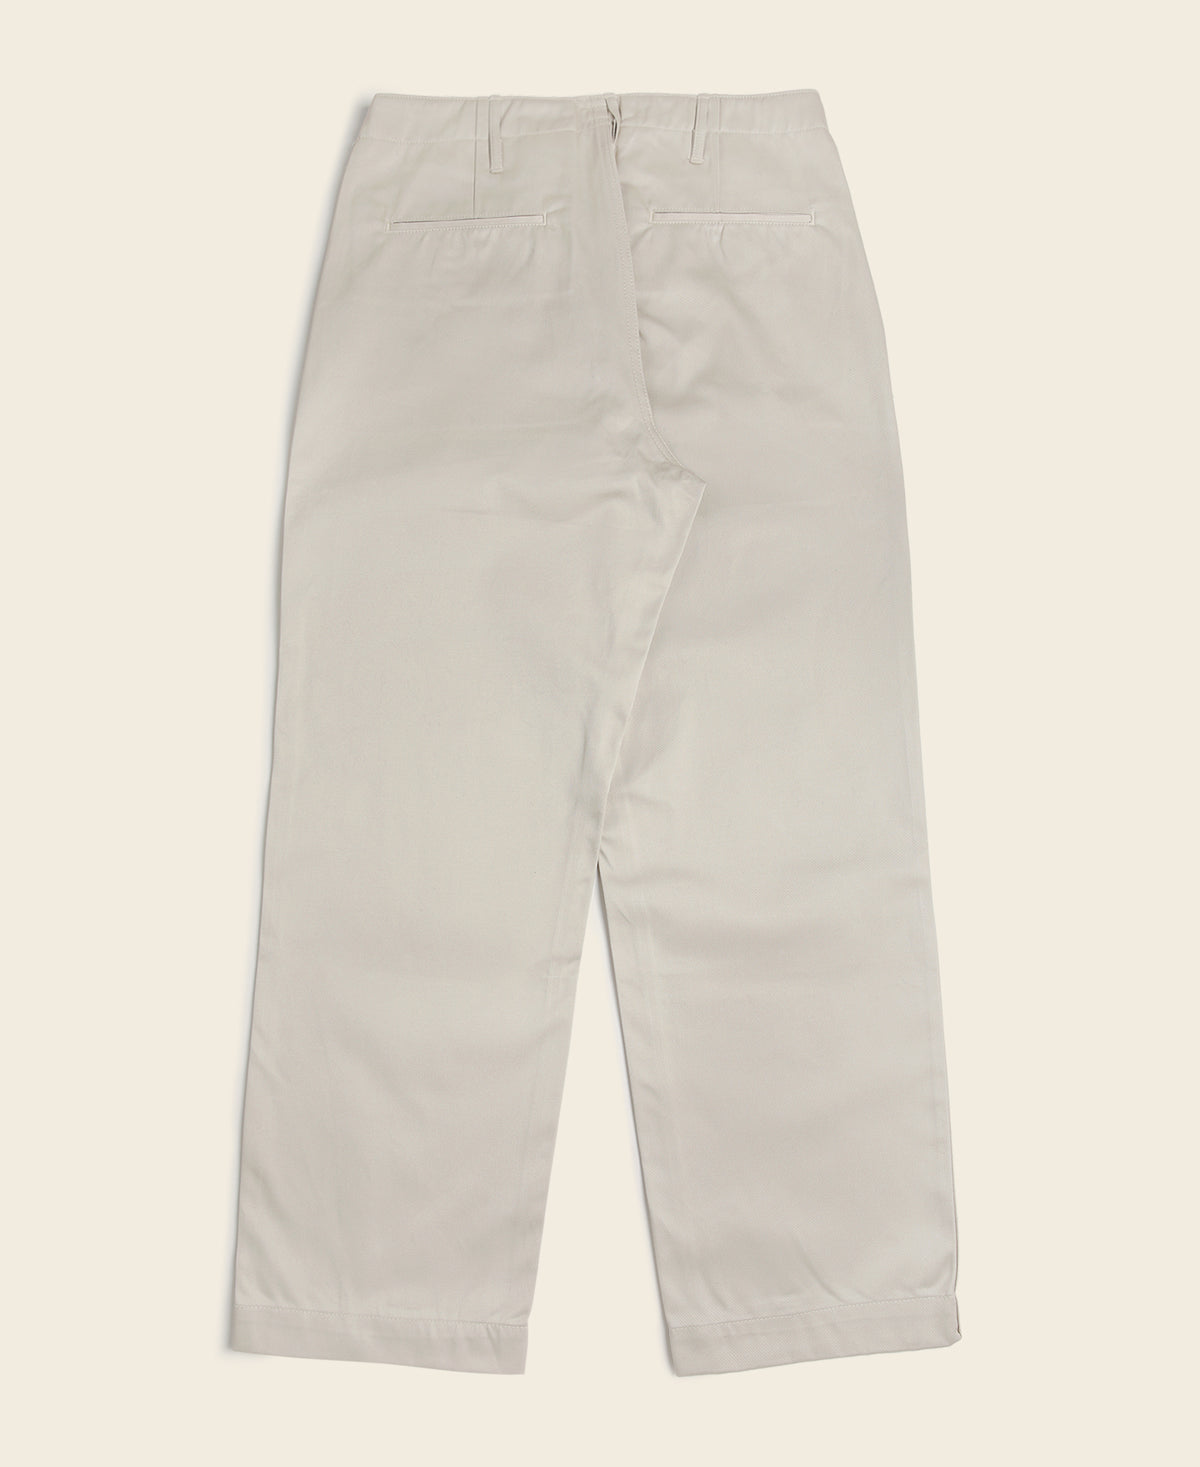 1950s US Army 14 oz Officer Chino Trousers - White